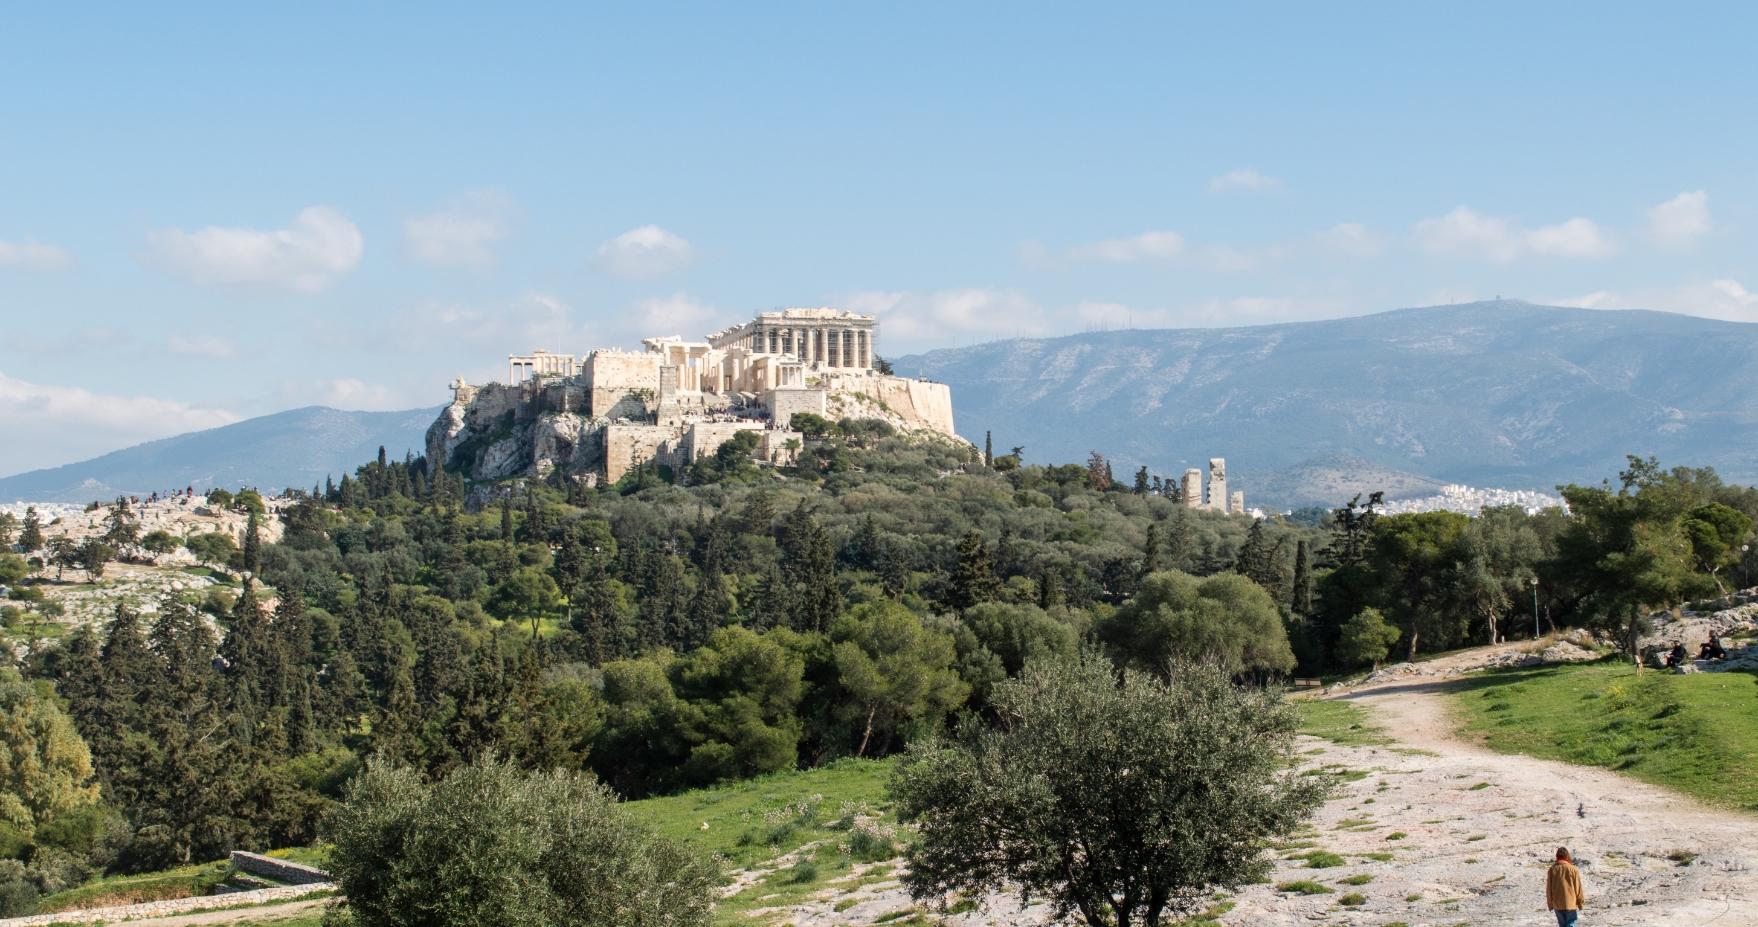 Akropolis monumental hill in Athens, Greece